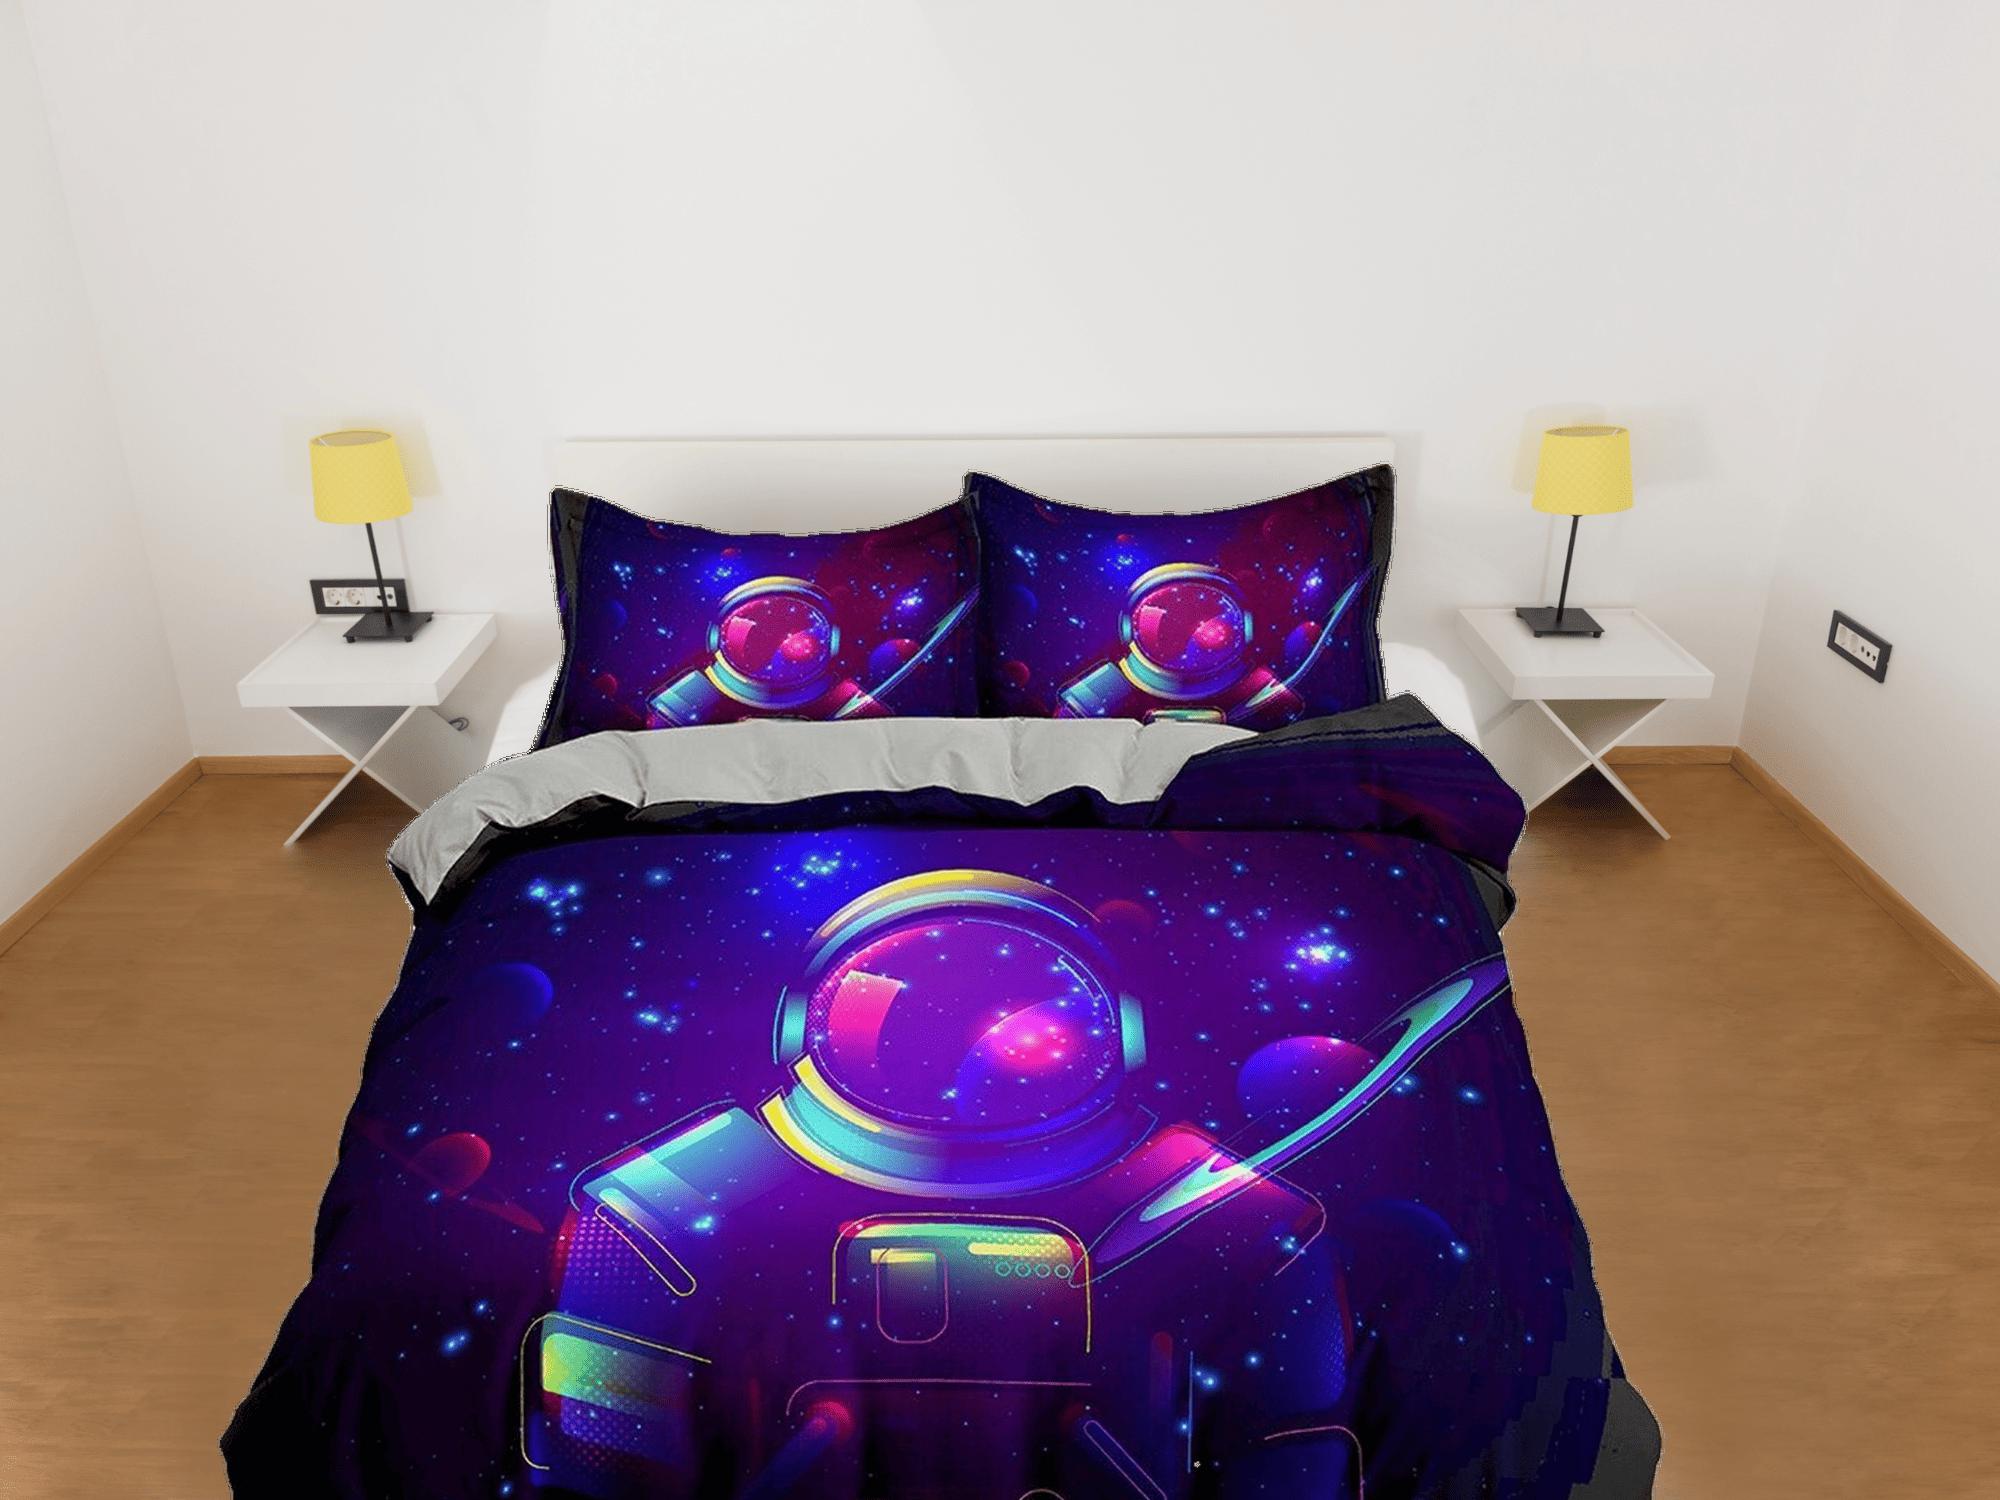 daintyduvet Neon Space Galaxy Astronaut Purple Bedding, Cool Hippie Duvet Cover Set, Bedding for Kids, Teens, Boys and Adults, Dark Colored Bed Cover